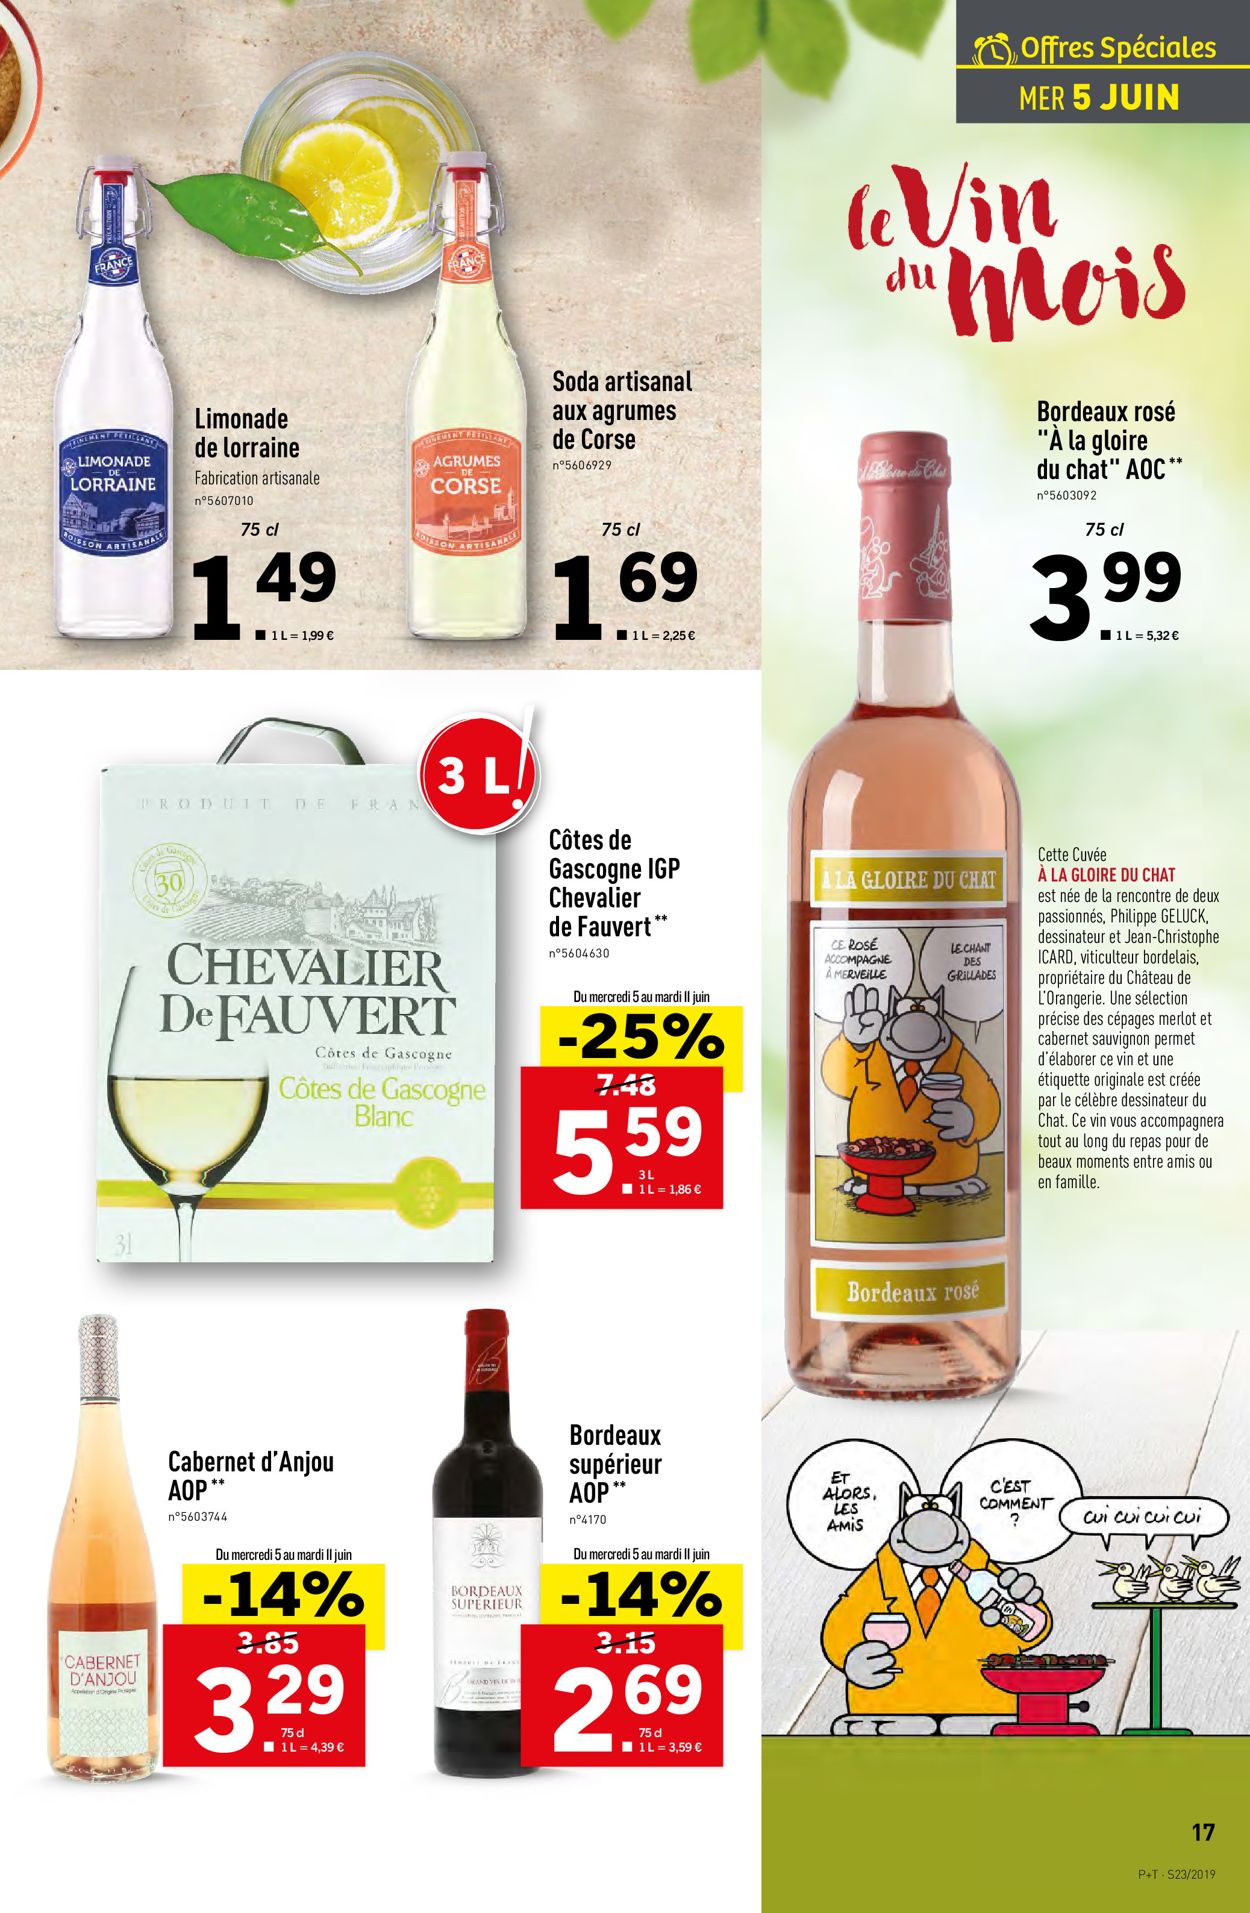 Lidl Catalogue - 05.06-11.06.2019 (Page 17)